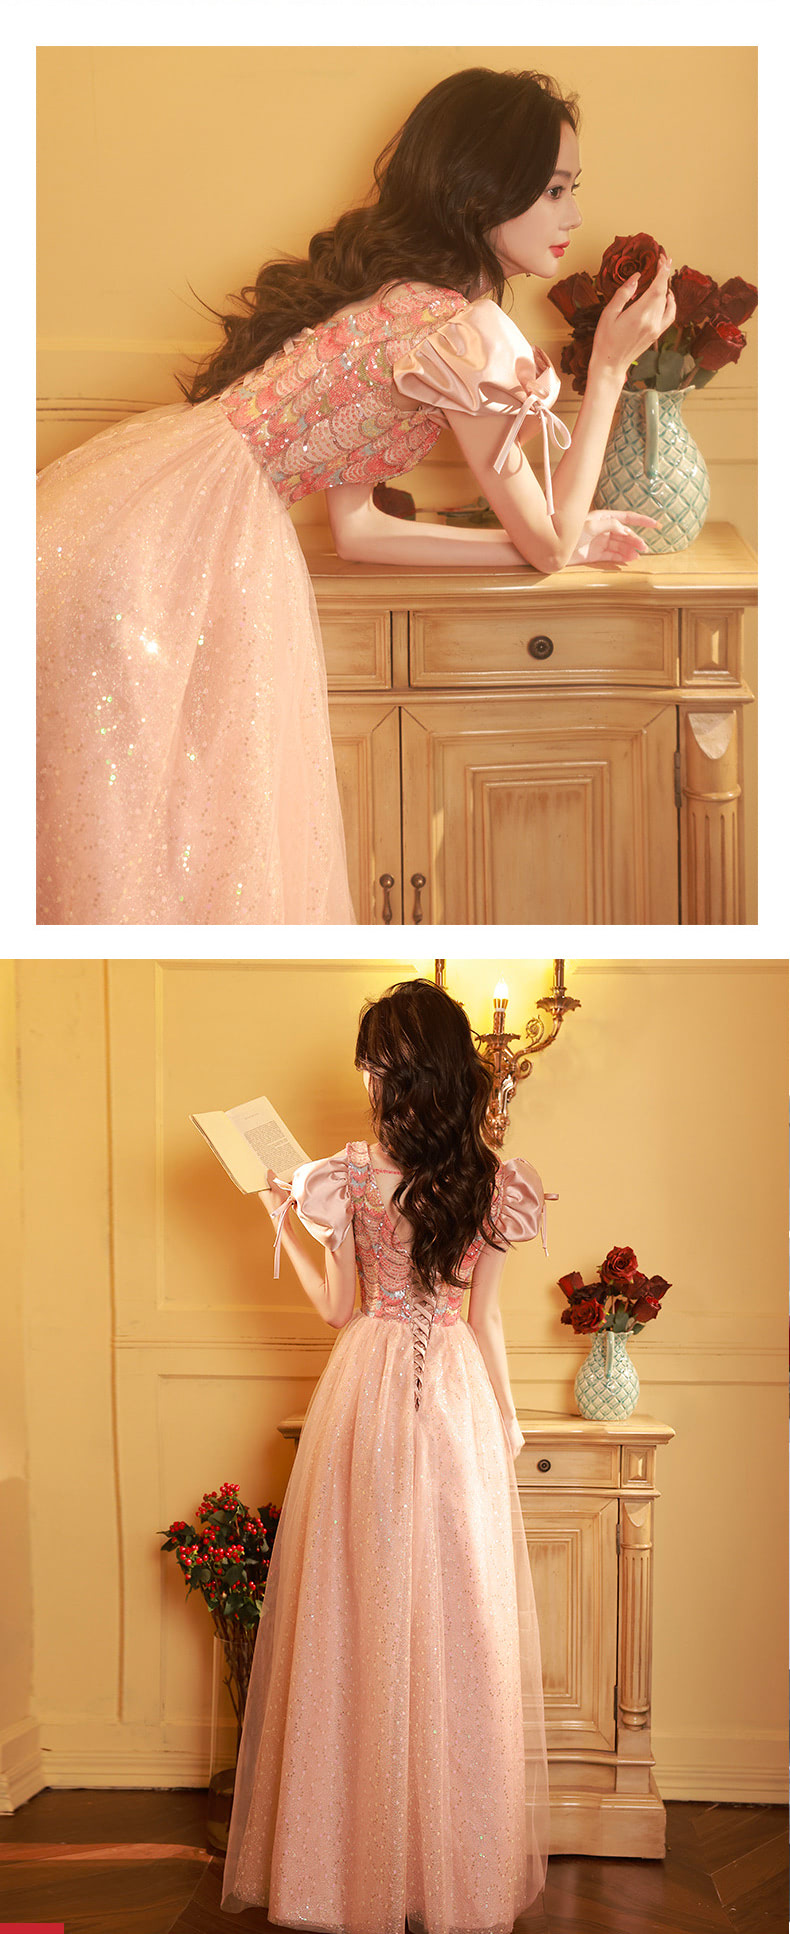 Beautiful-Romantic-Princess-Pink-Cocktail-Party-Dress-Formal-Gown13.jpg